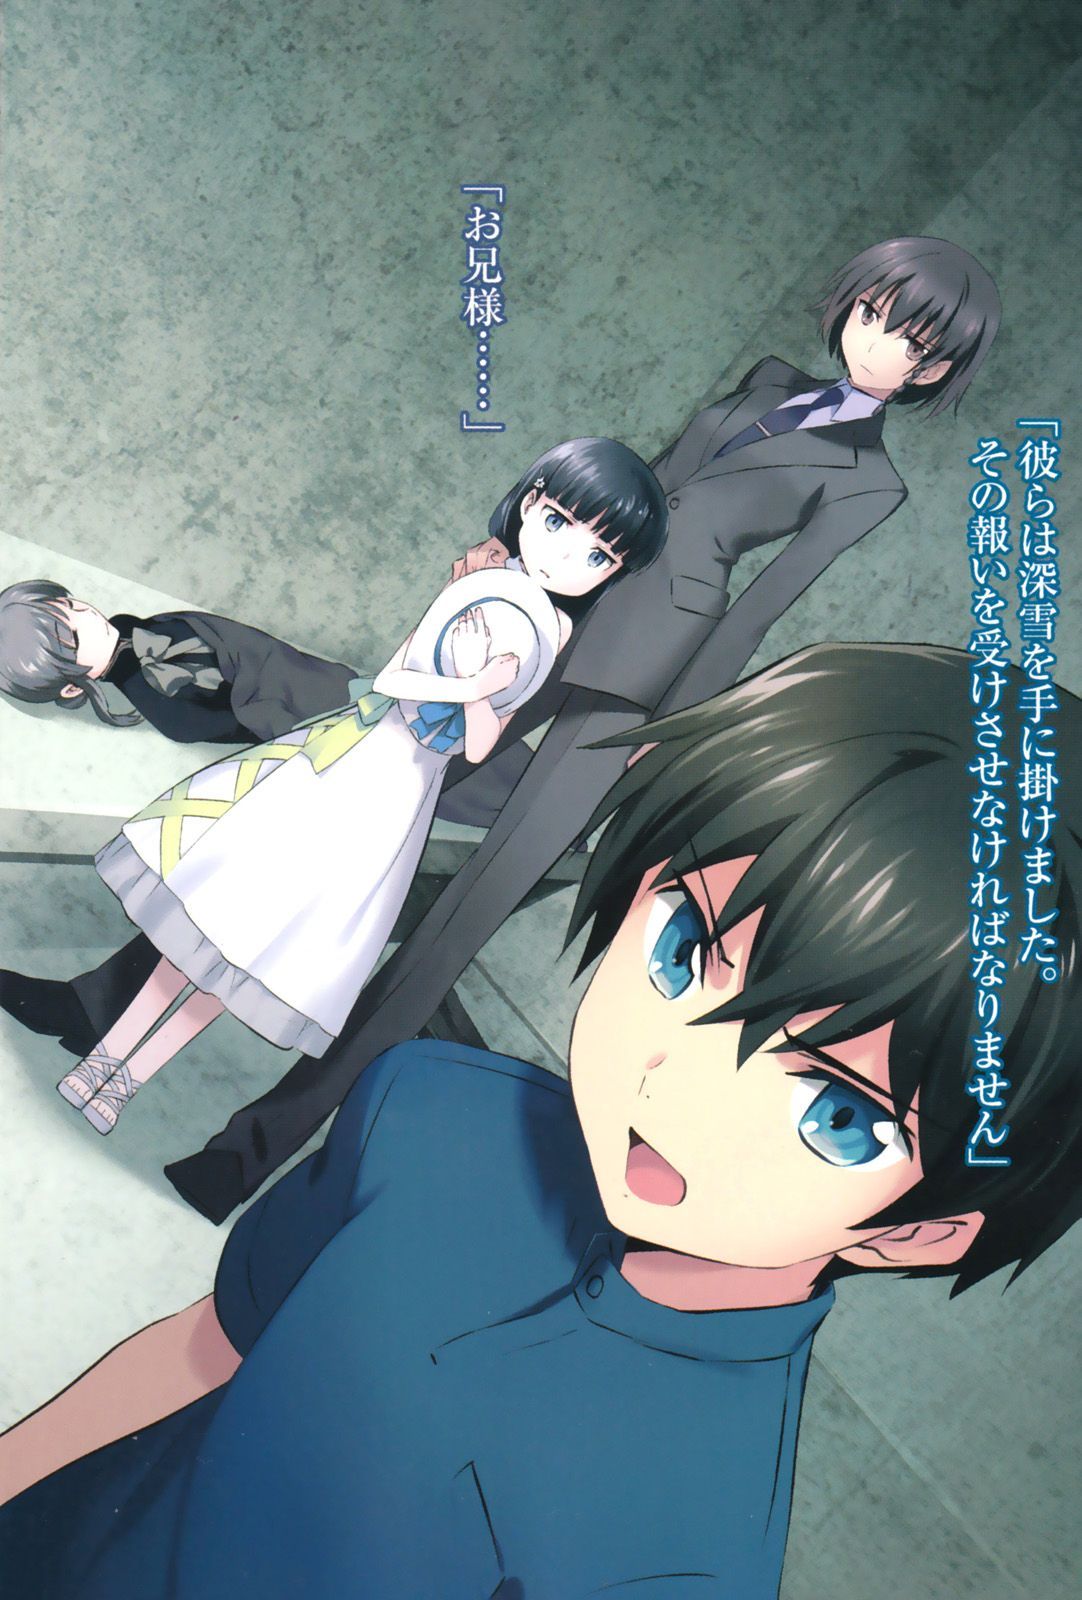 the irregular at magic high school movie for free online